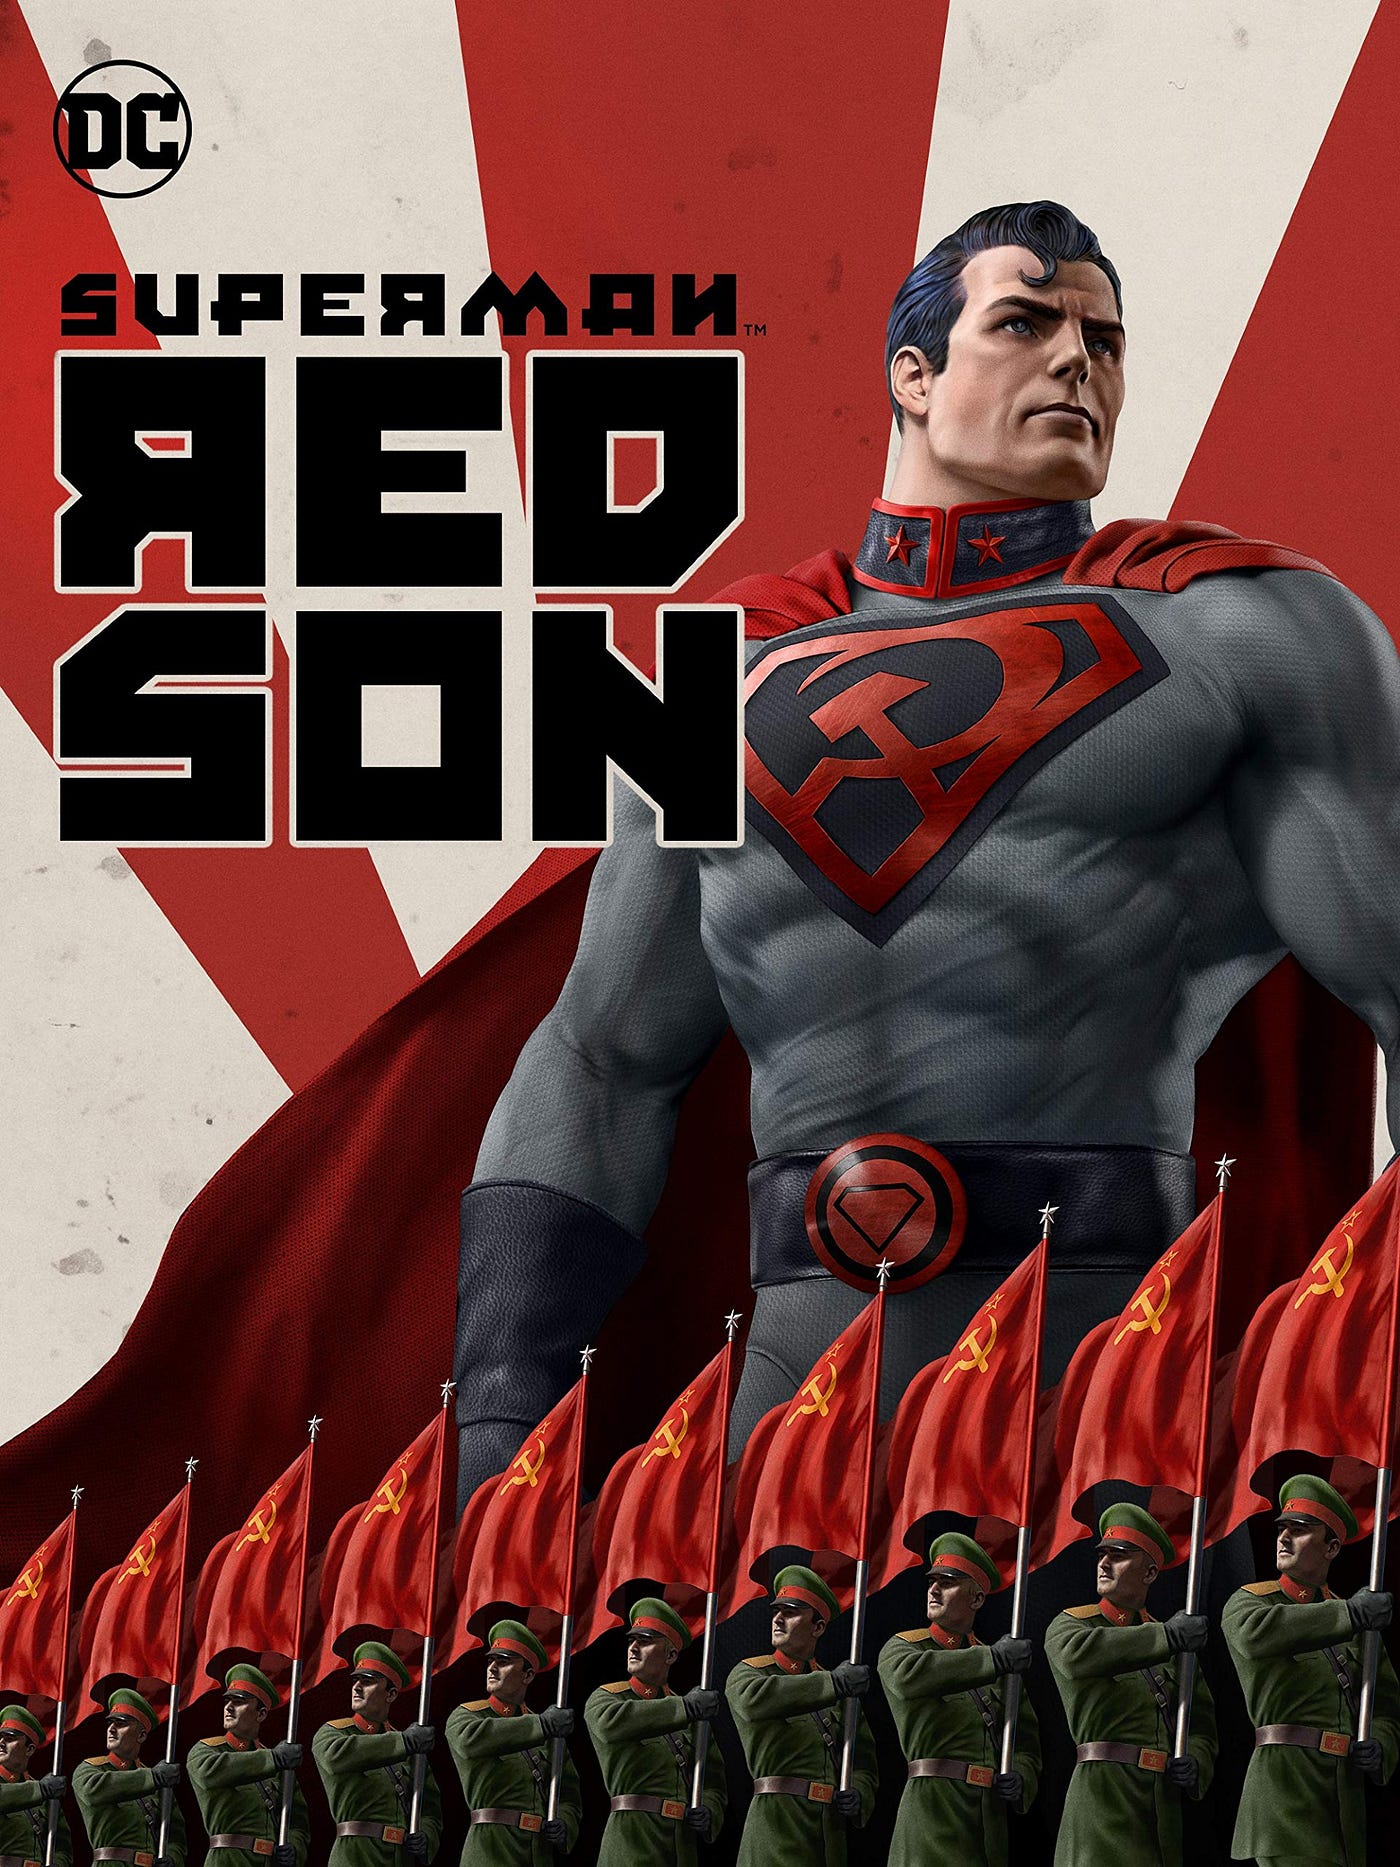 Henry Cavill Sought After By Matthew Vaughn To Star In The Adaptation Of 'Superman: Red Son.'